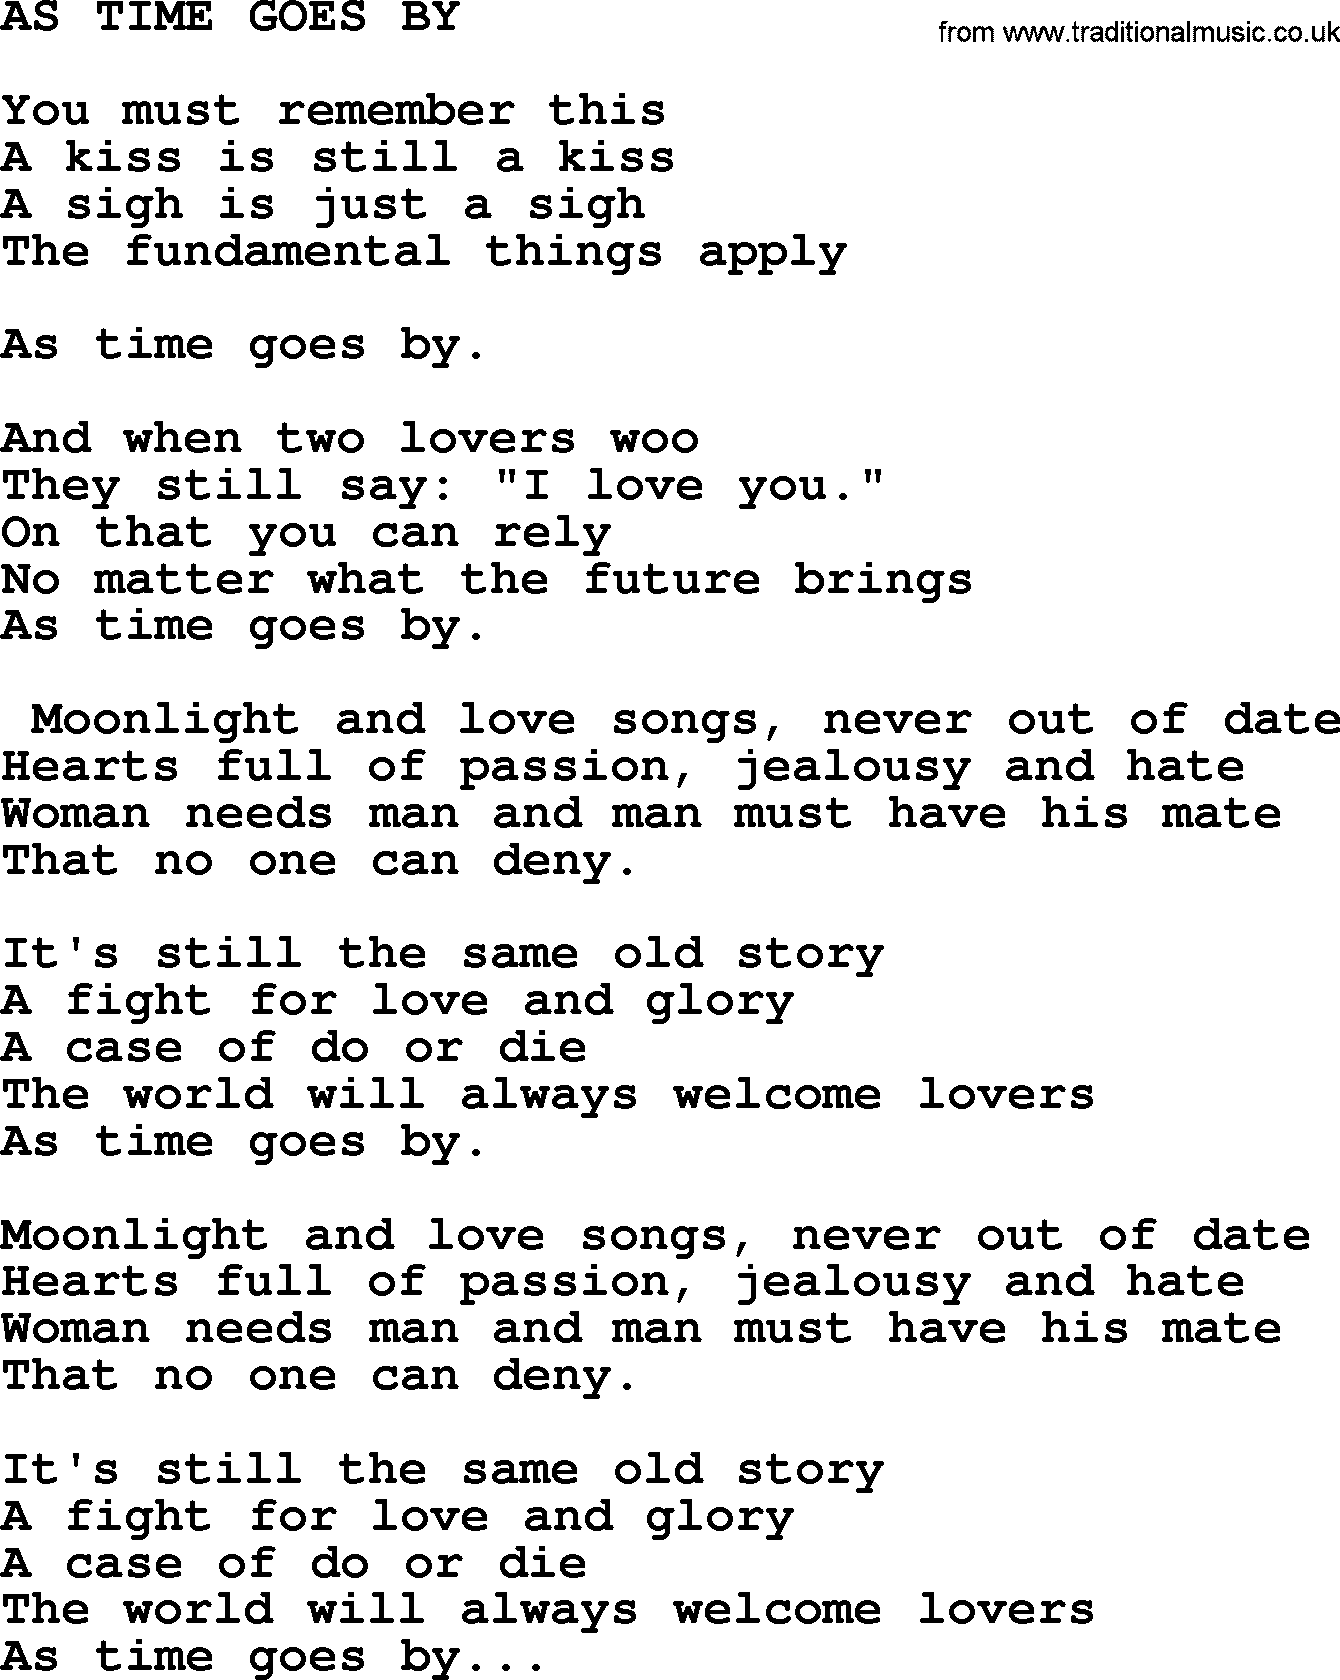 Merle Haggard song: As Time Goes By, lyrics.